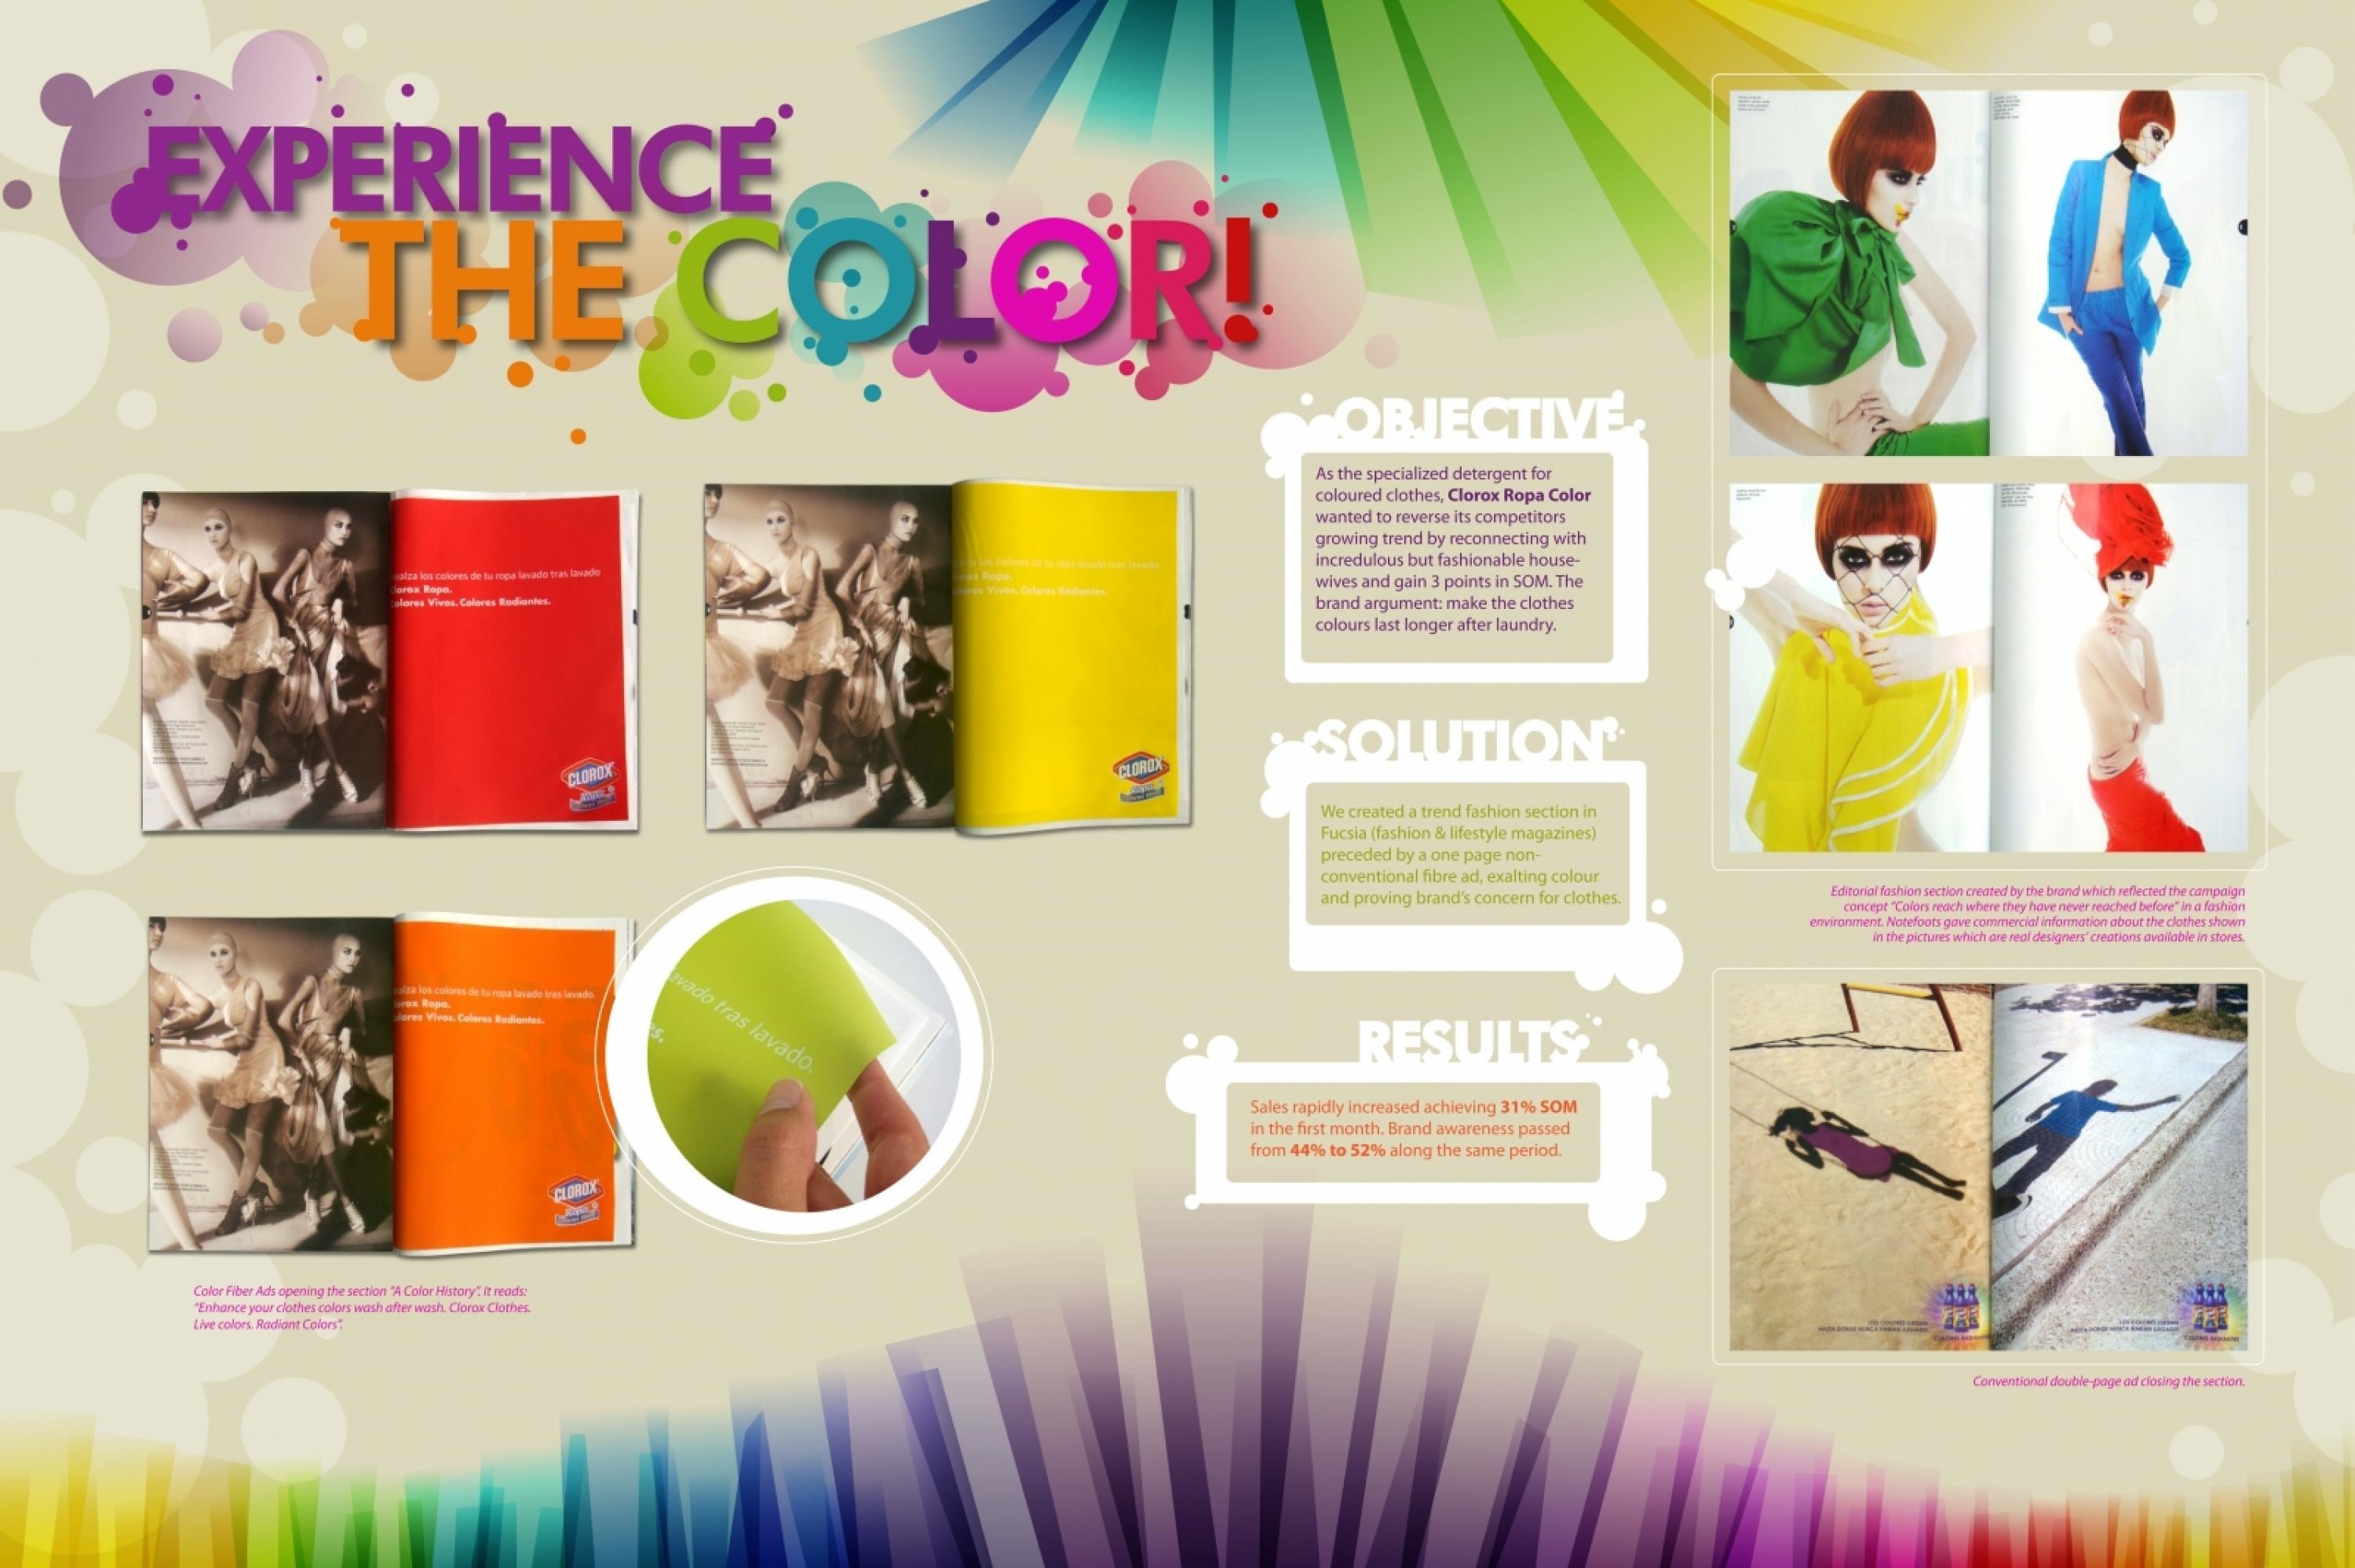 EXPERIENCE THE COLOUR